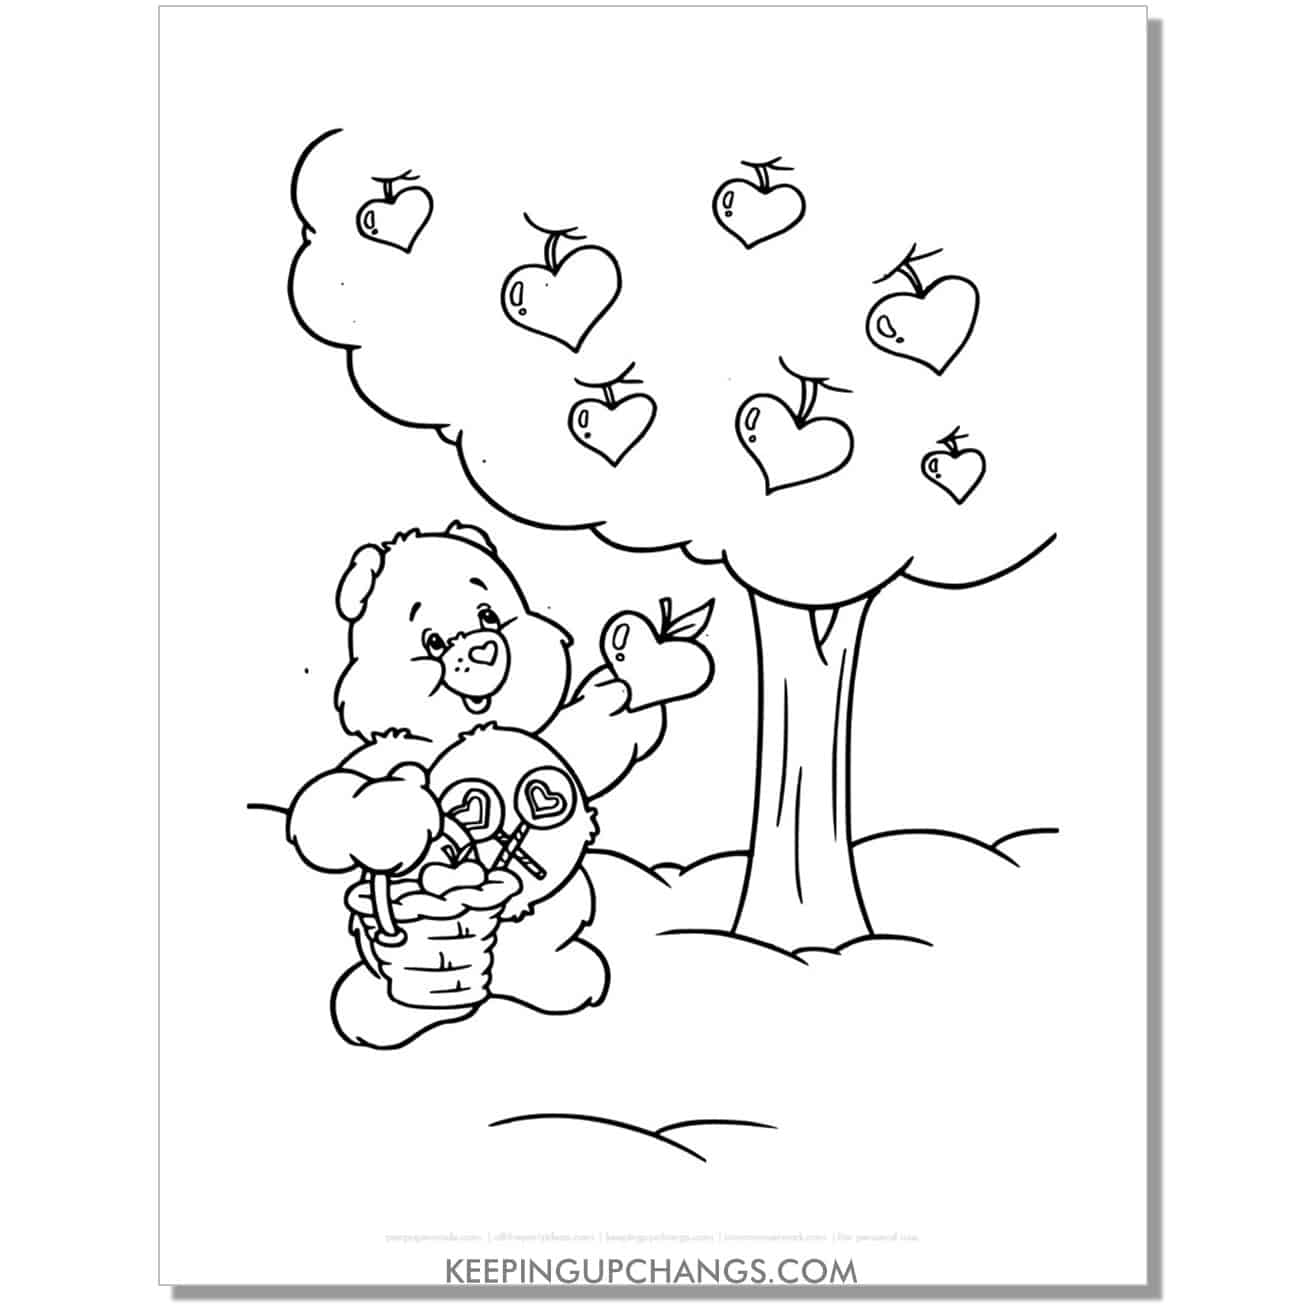 share bear picking apples from tree care bear coloring page, sheet.